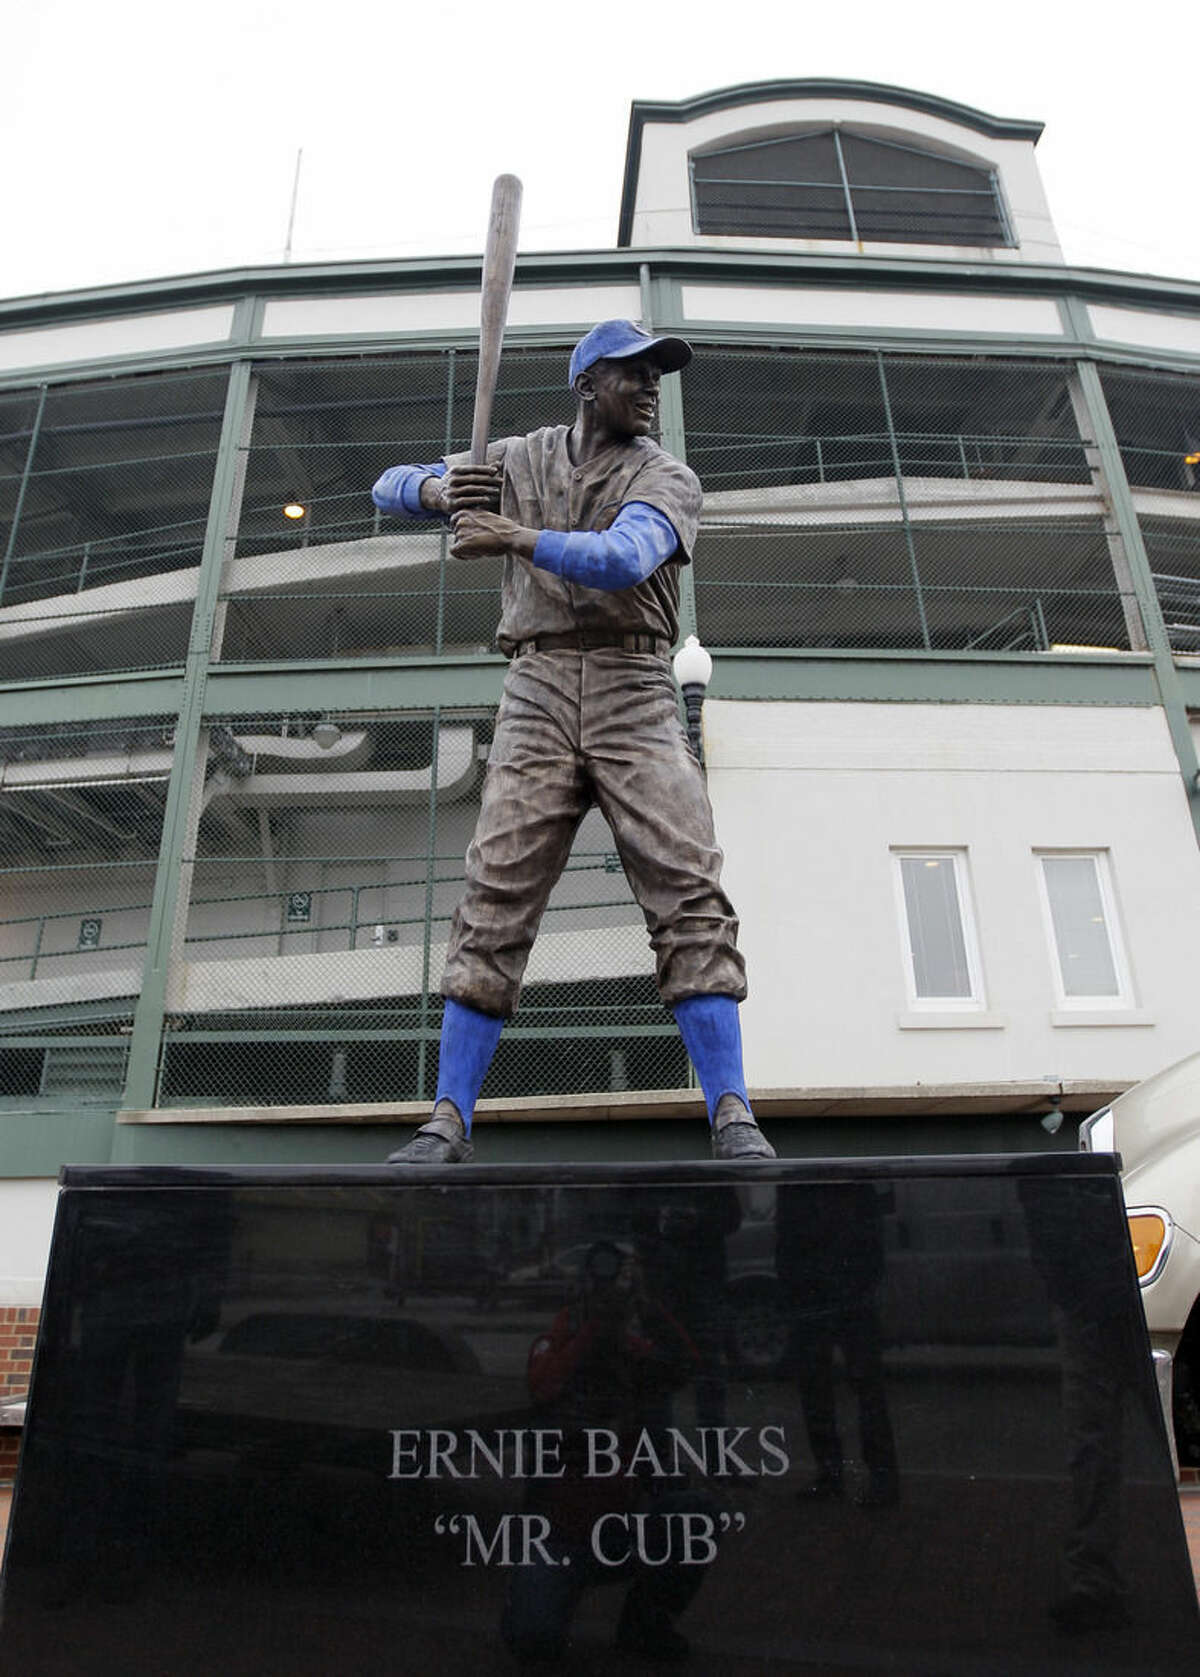 Hall of Famer Ernie Banks mourned in sports world and beyond